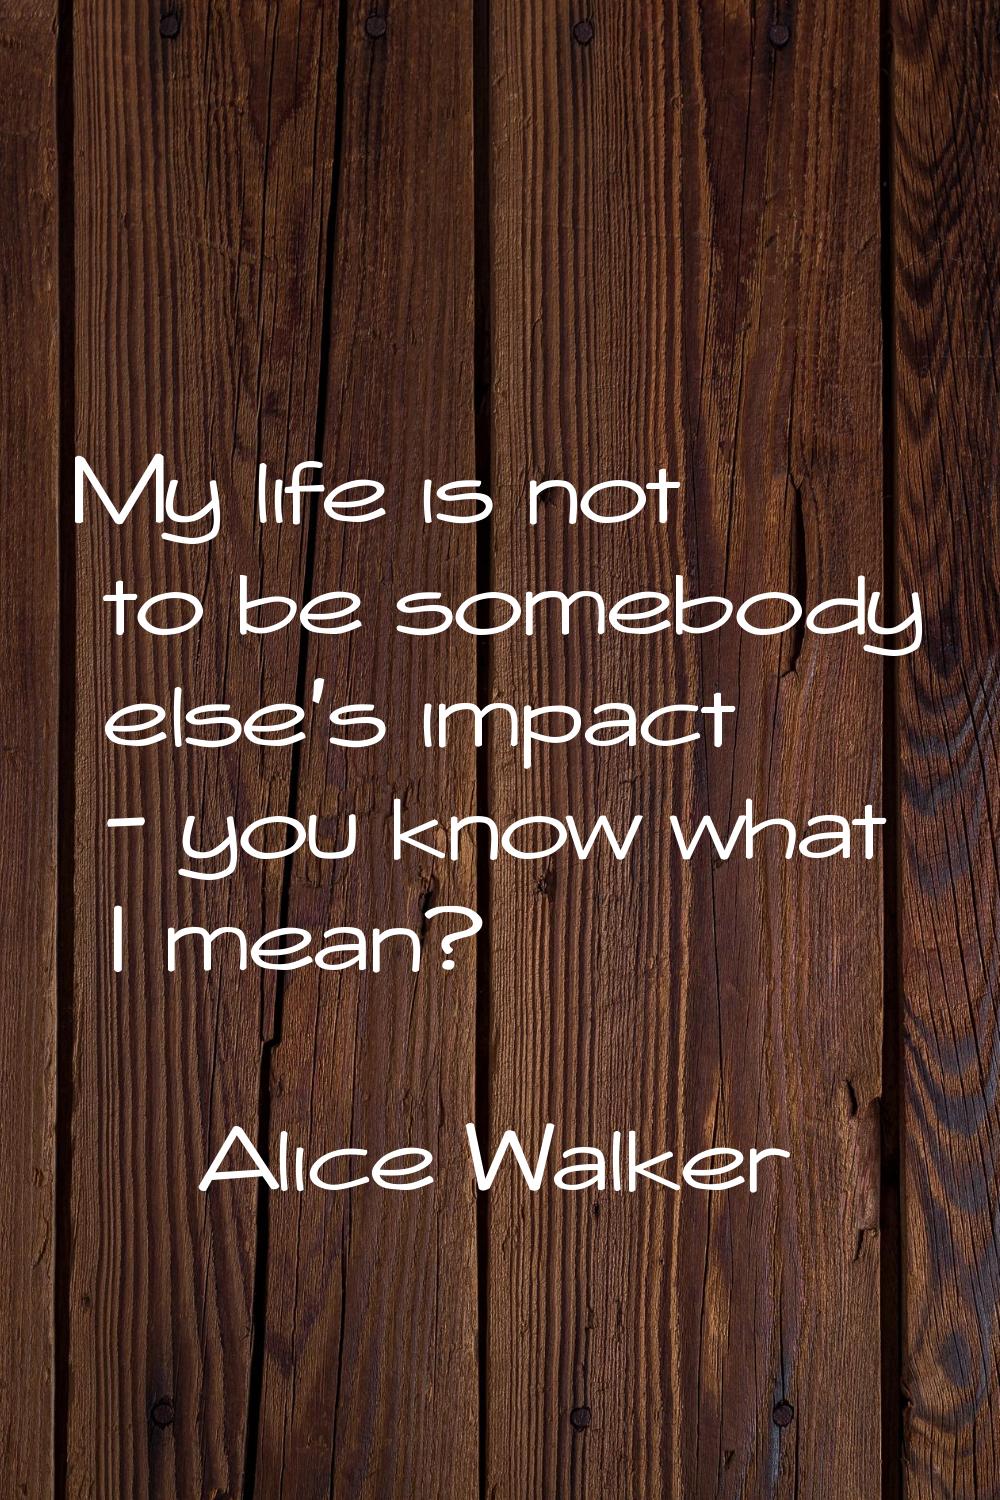 My life is not to be somebody else's impact - you know what I mean?